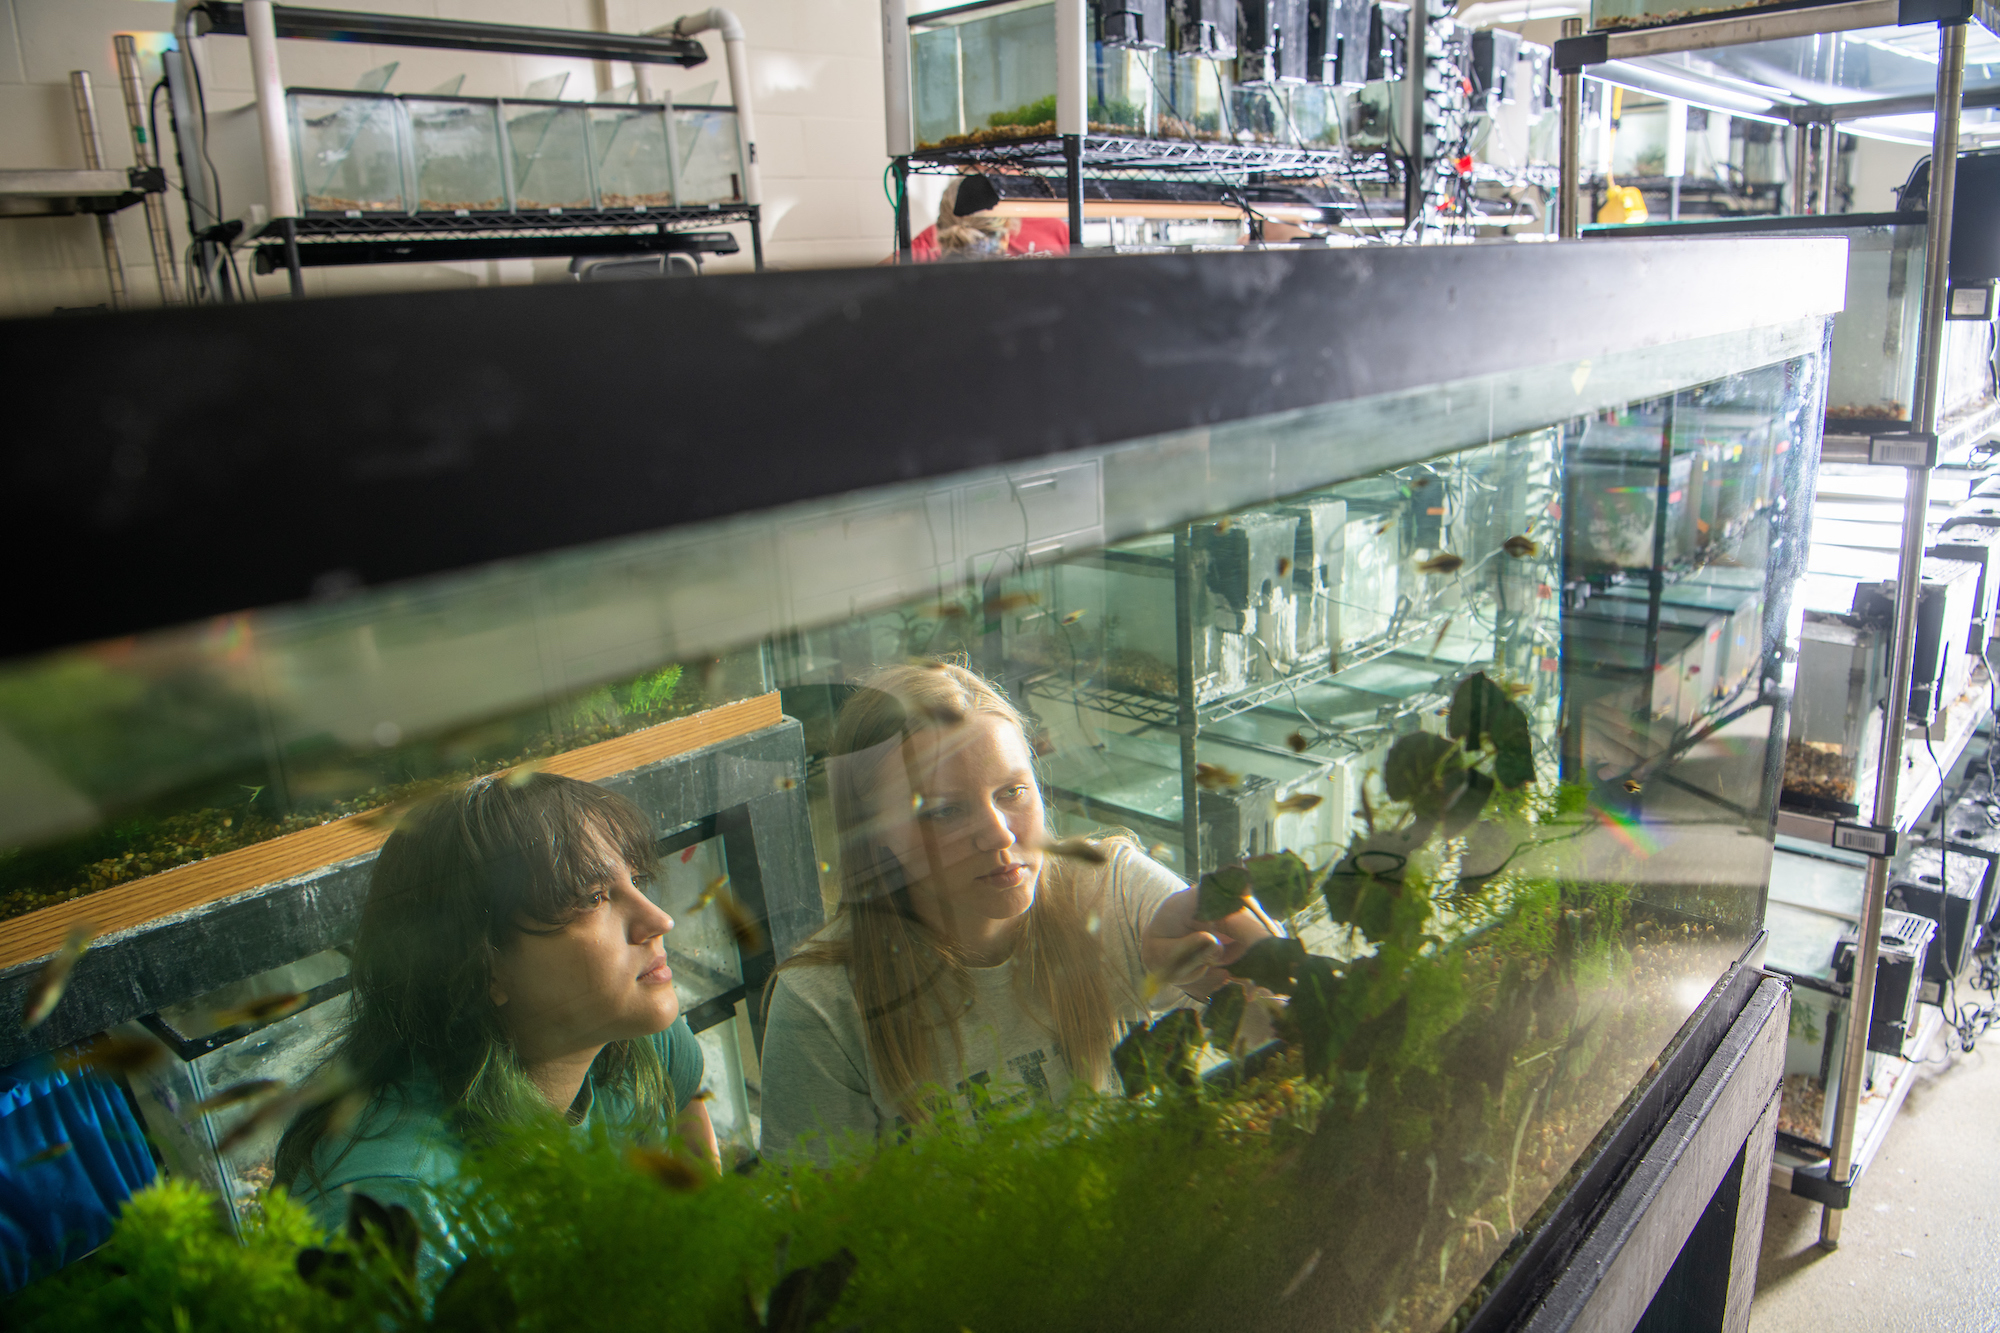 Two undergraduate students look into a fish tank with lots of greenery and fish